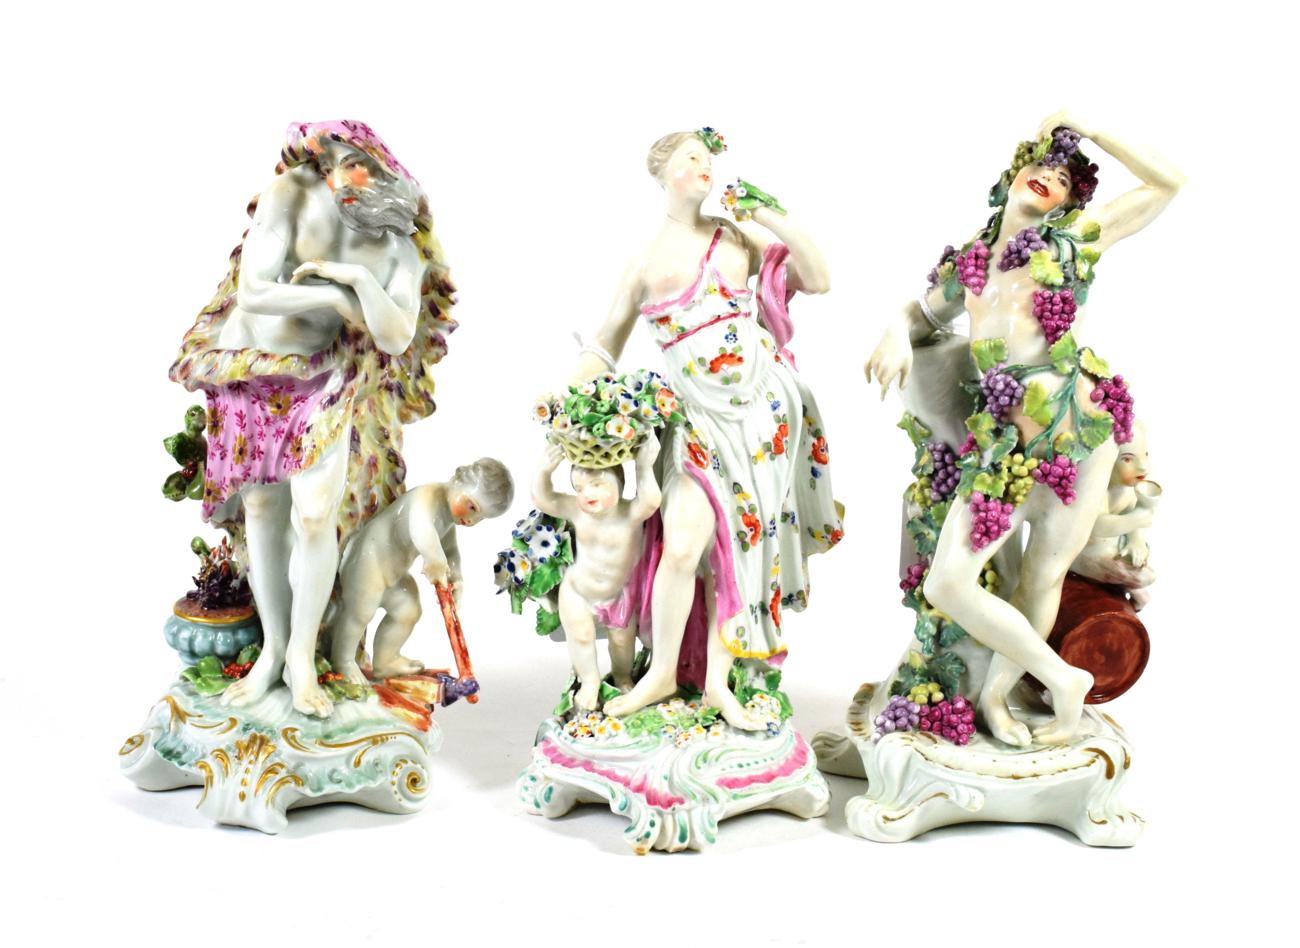 A Matched Set of Three Derby Porcelain Figures of The Seasons, circa 1765, Spring as a classical